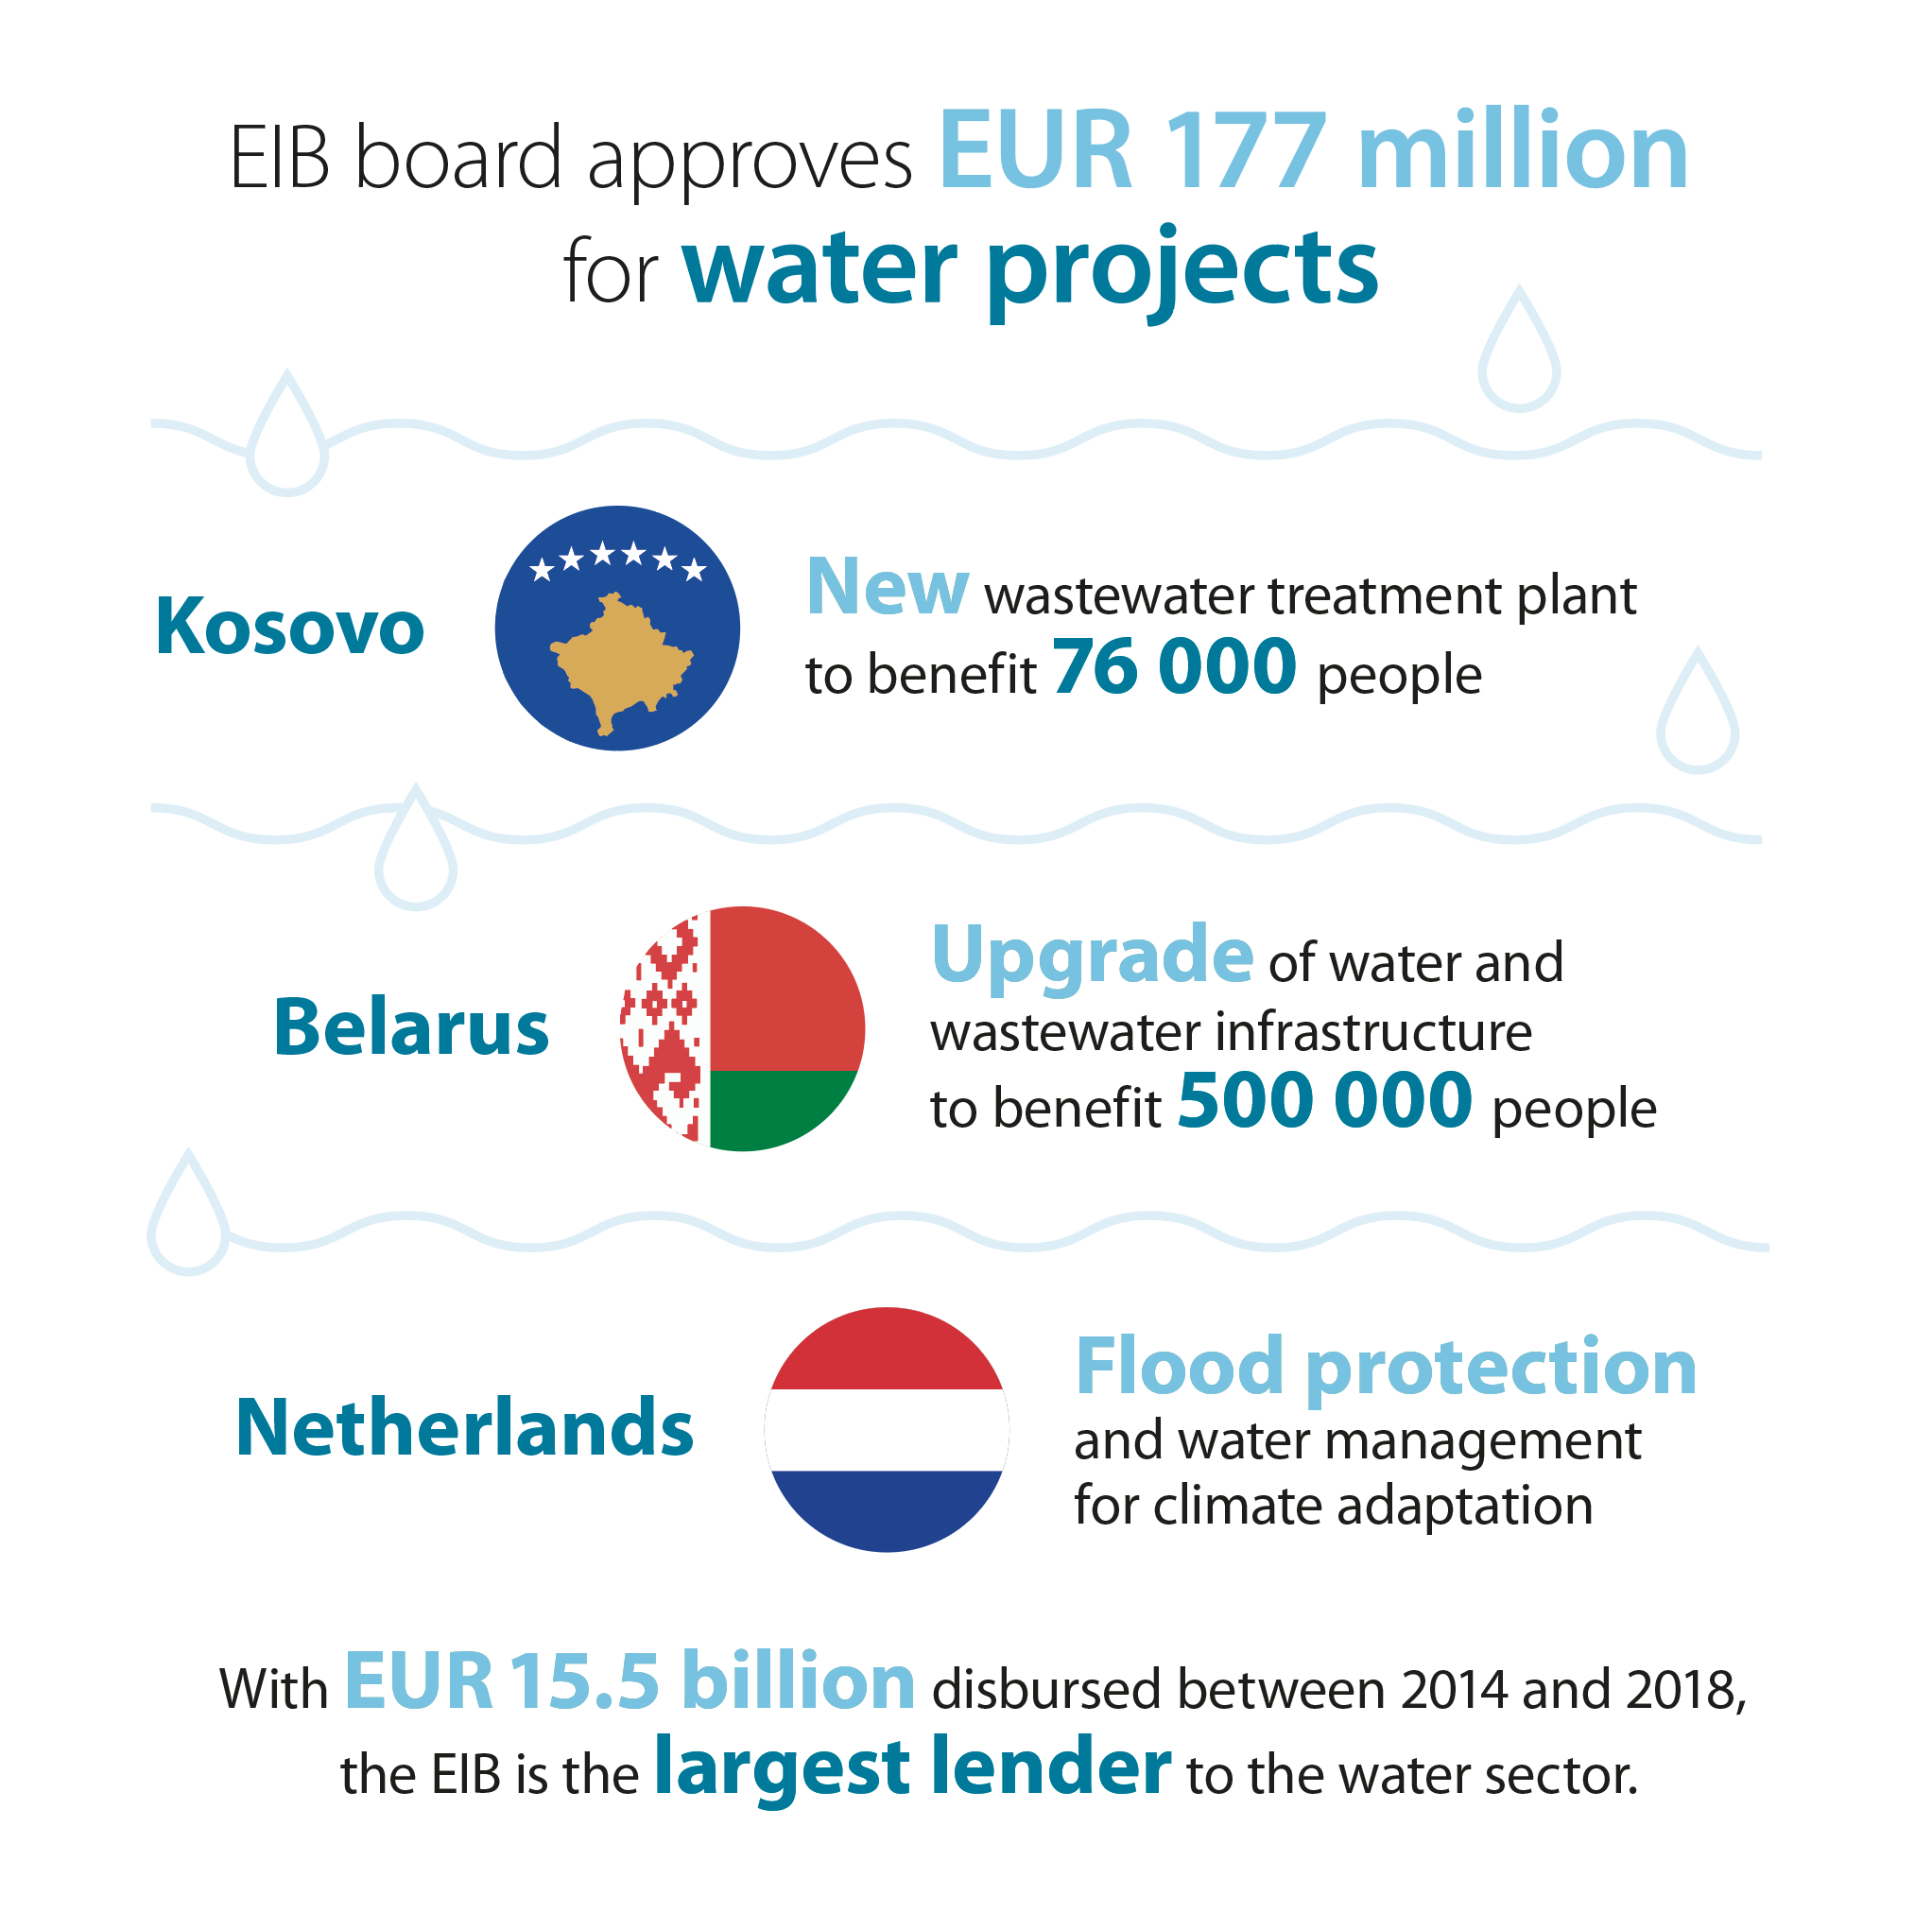 EIB board approves EUR 177 million for water projects